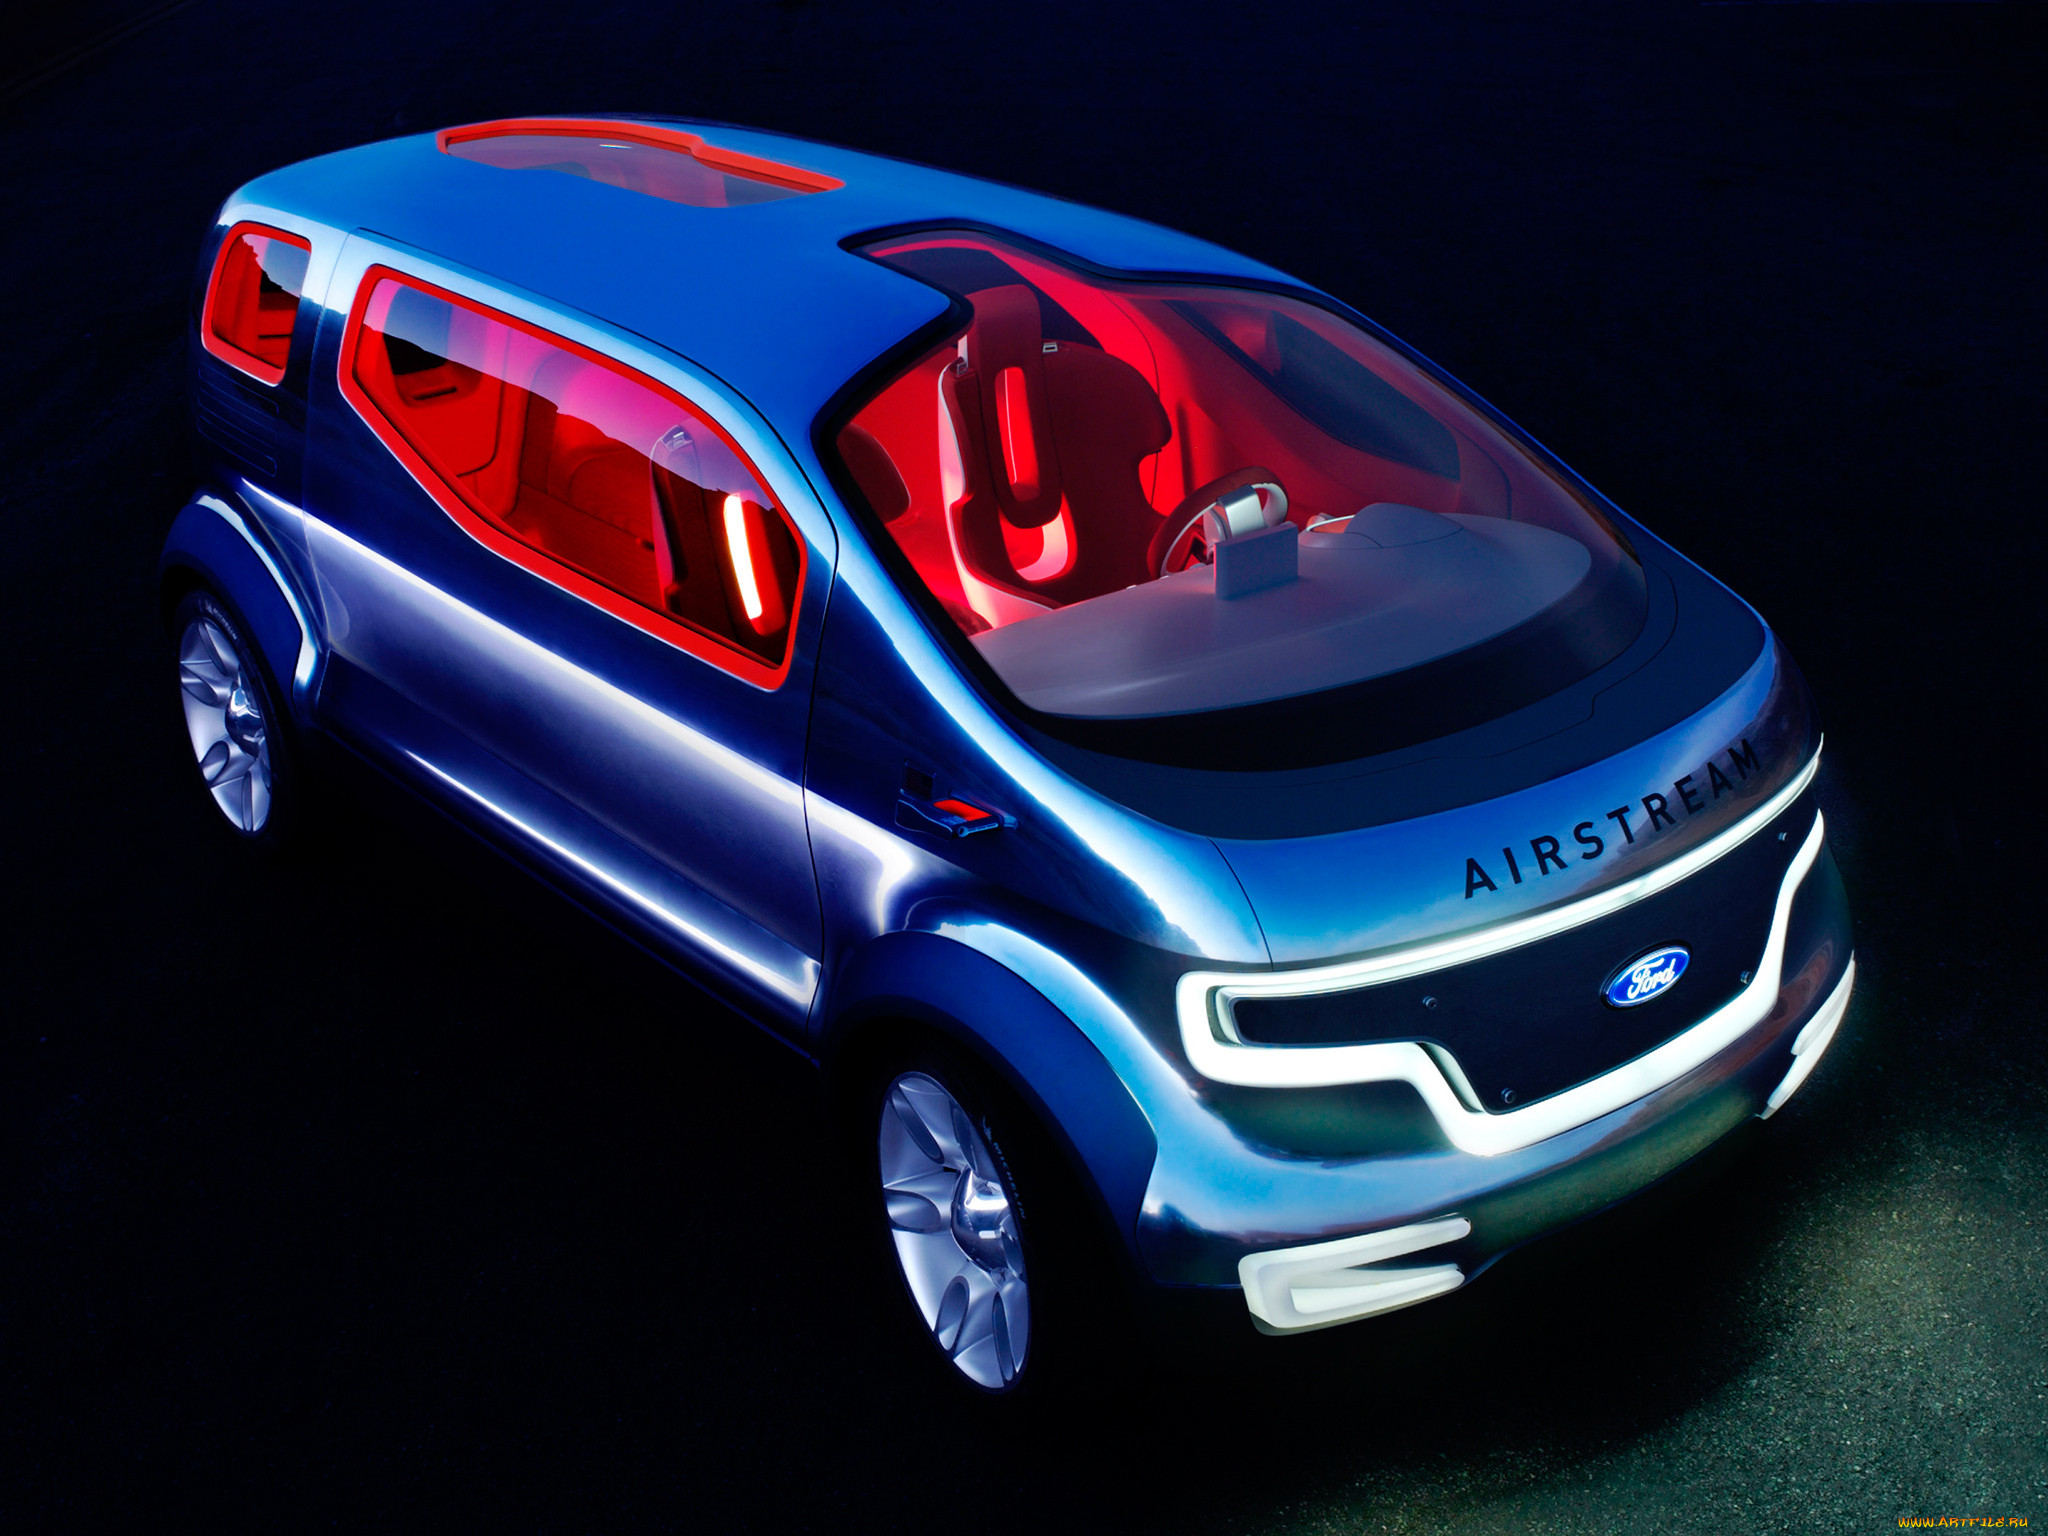 ford airstream concept 2007, , ford, concept, 2007, airstream